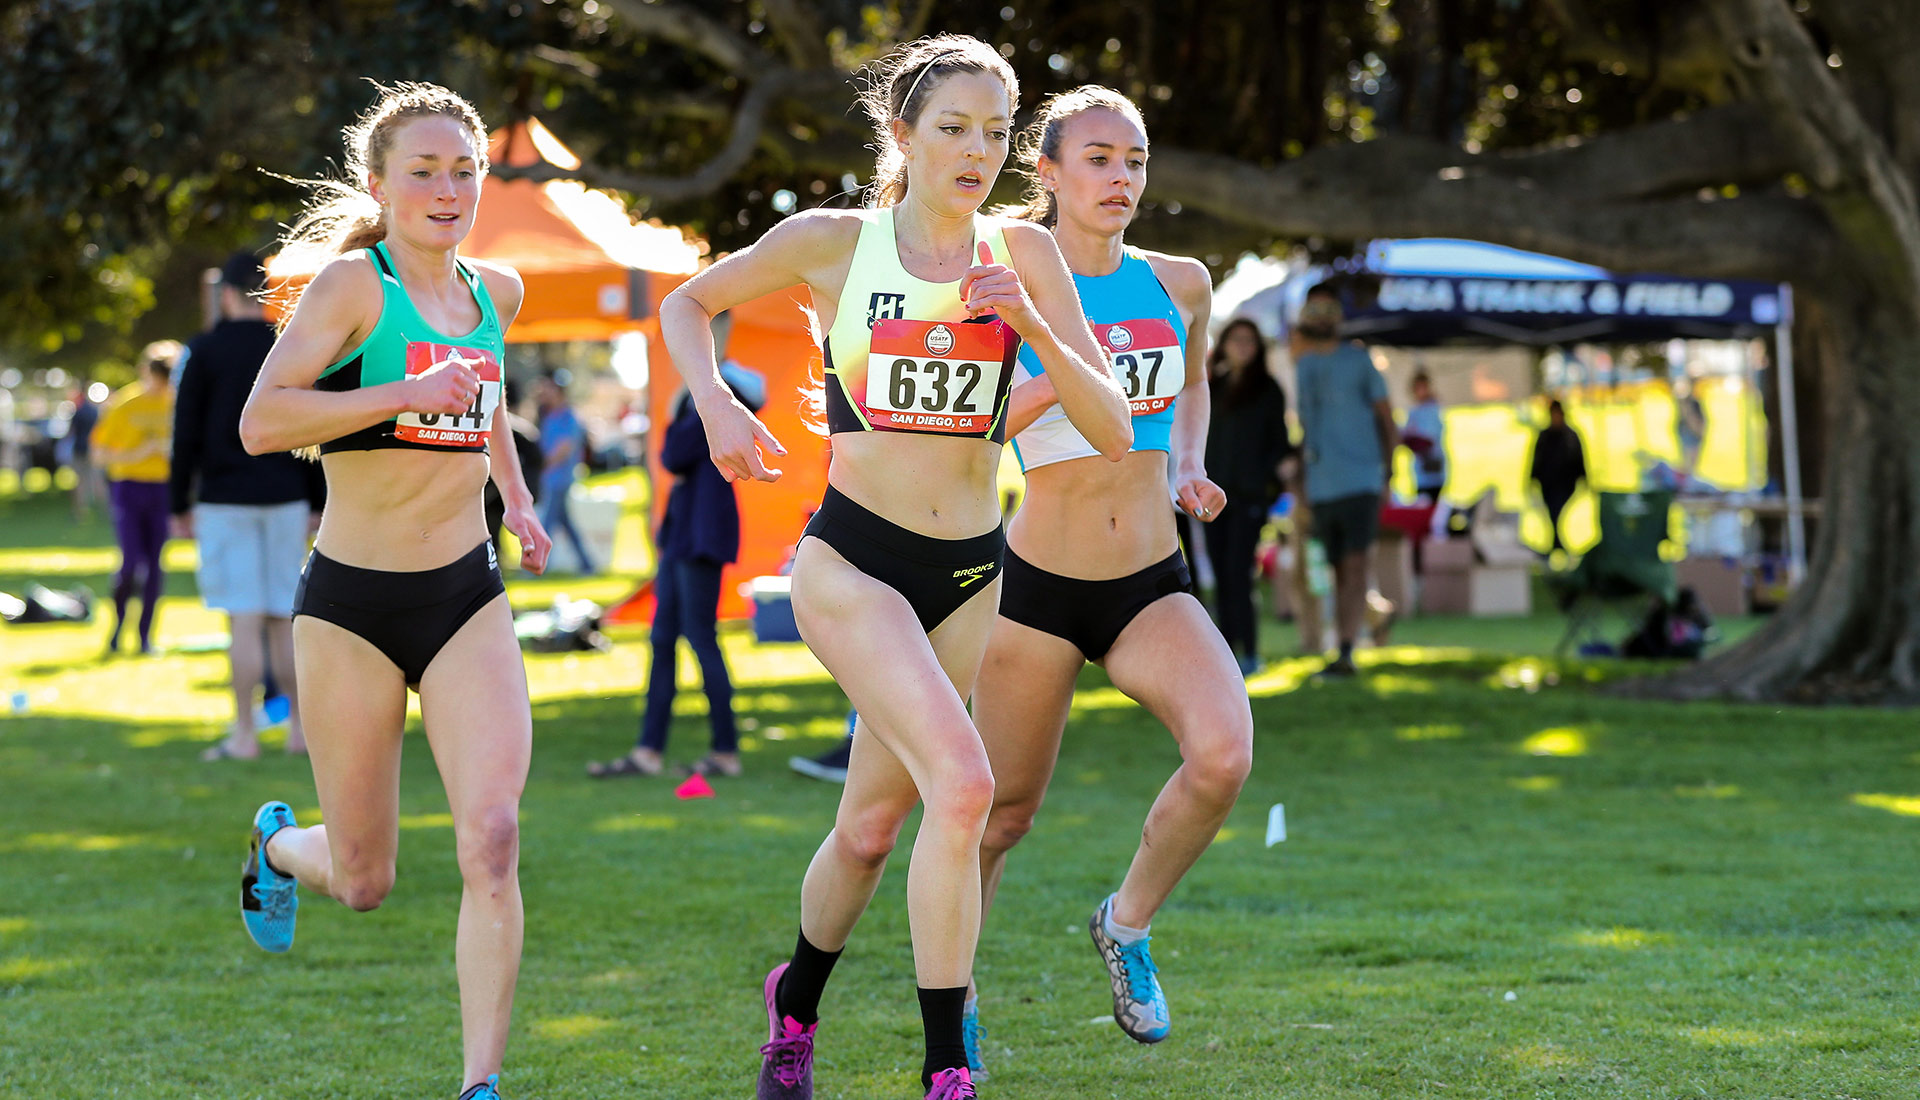 Brooks pro runner Natosha Rogers races at the USATF Club Cross-Country Championships.